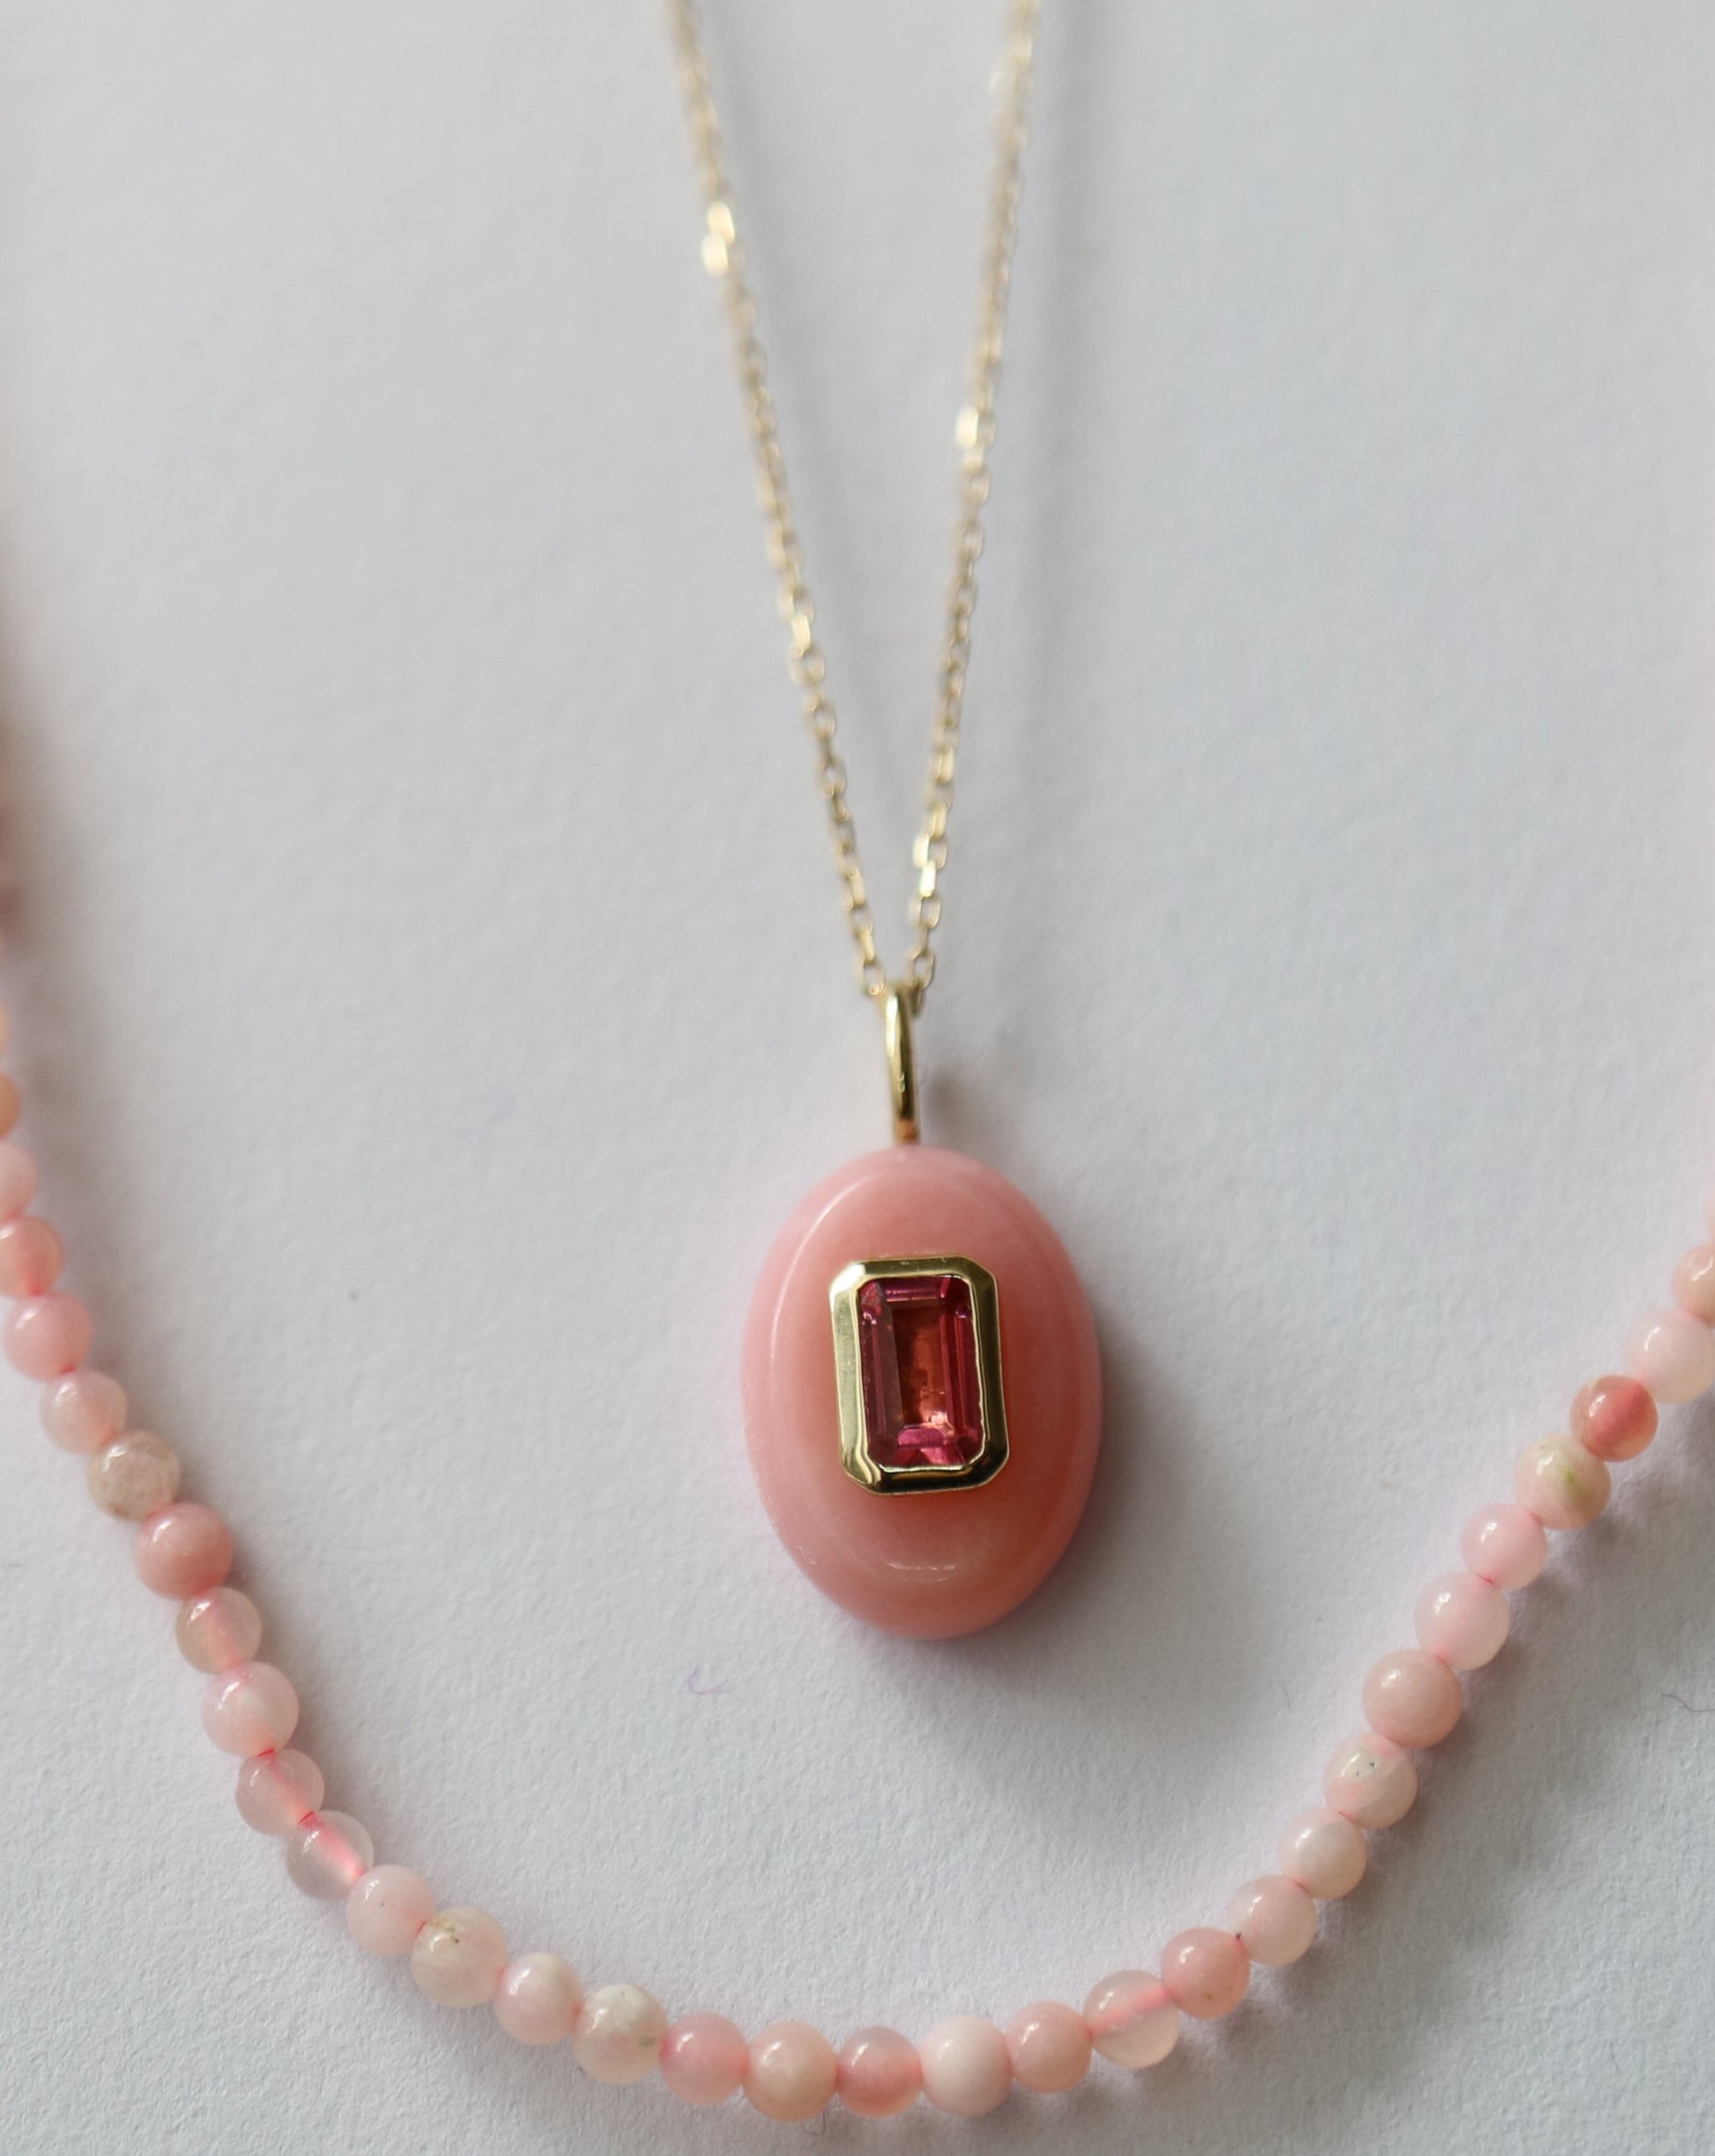 9ct gold and pink tourmaline pendant by Collective & Co.